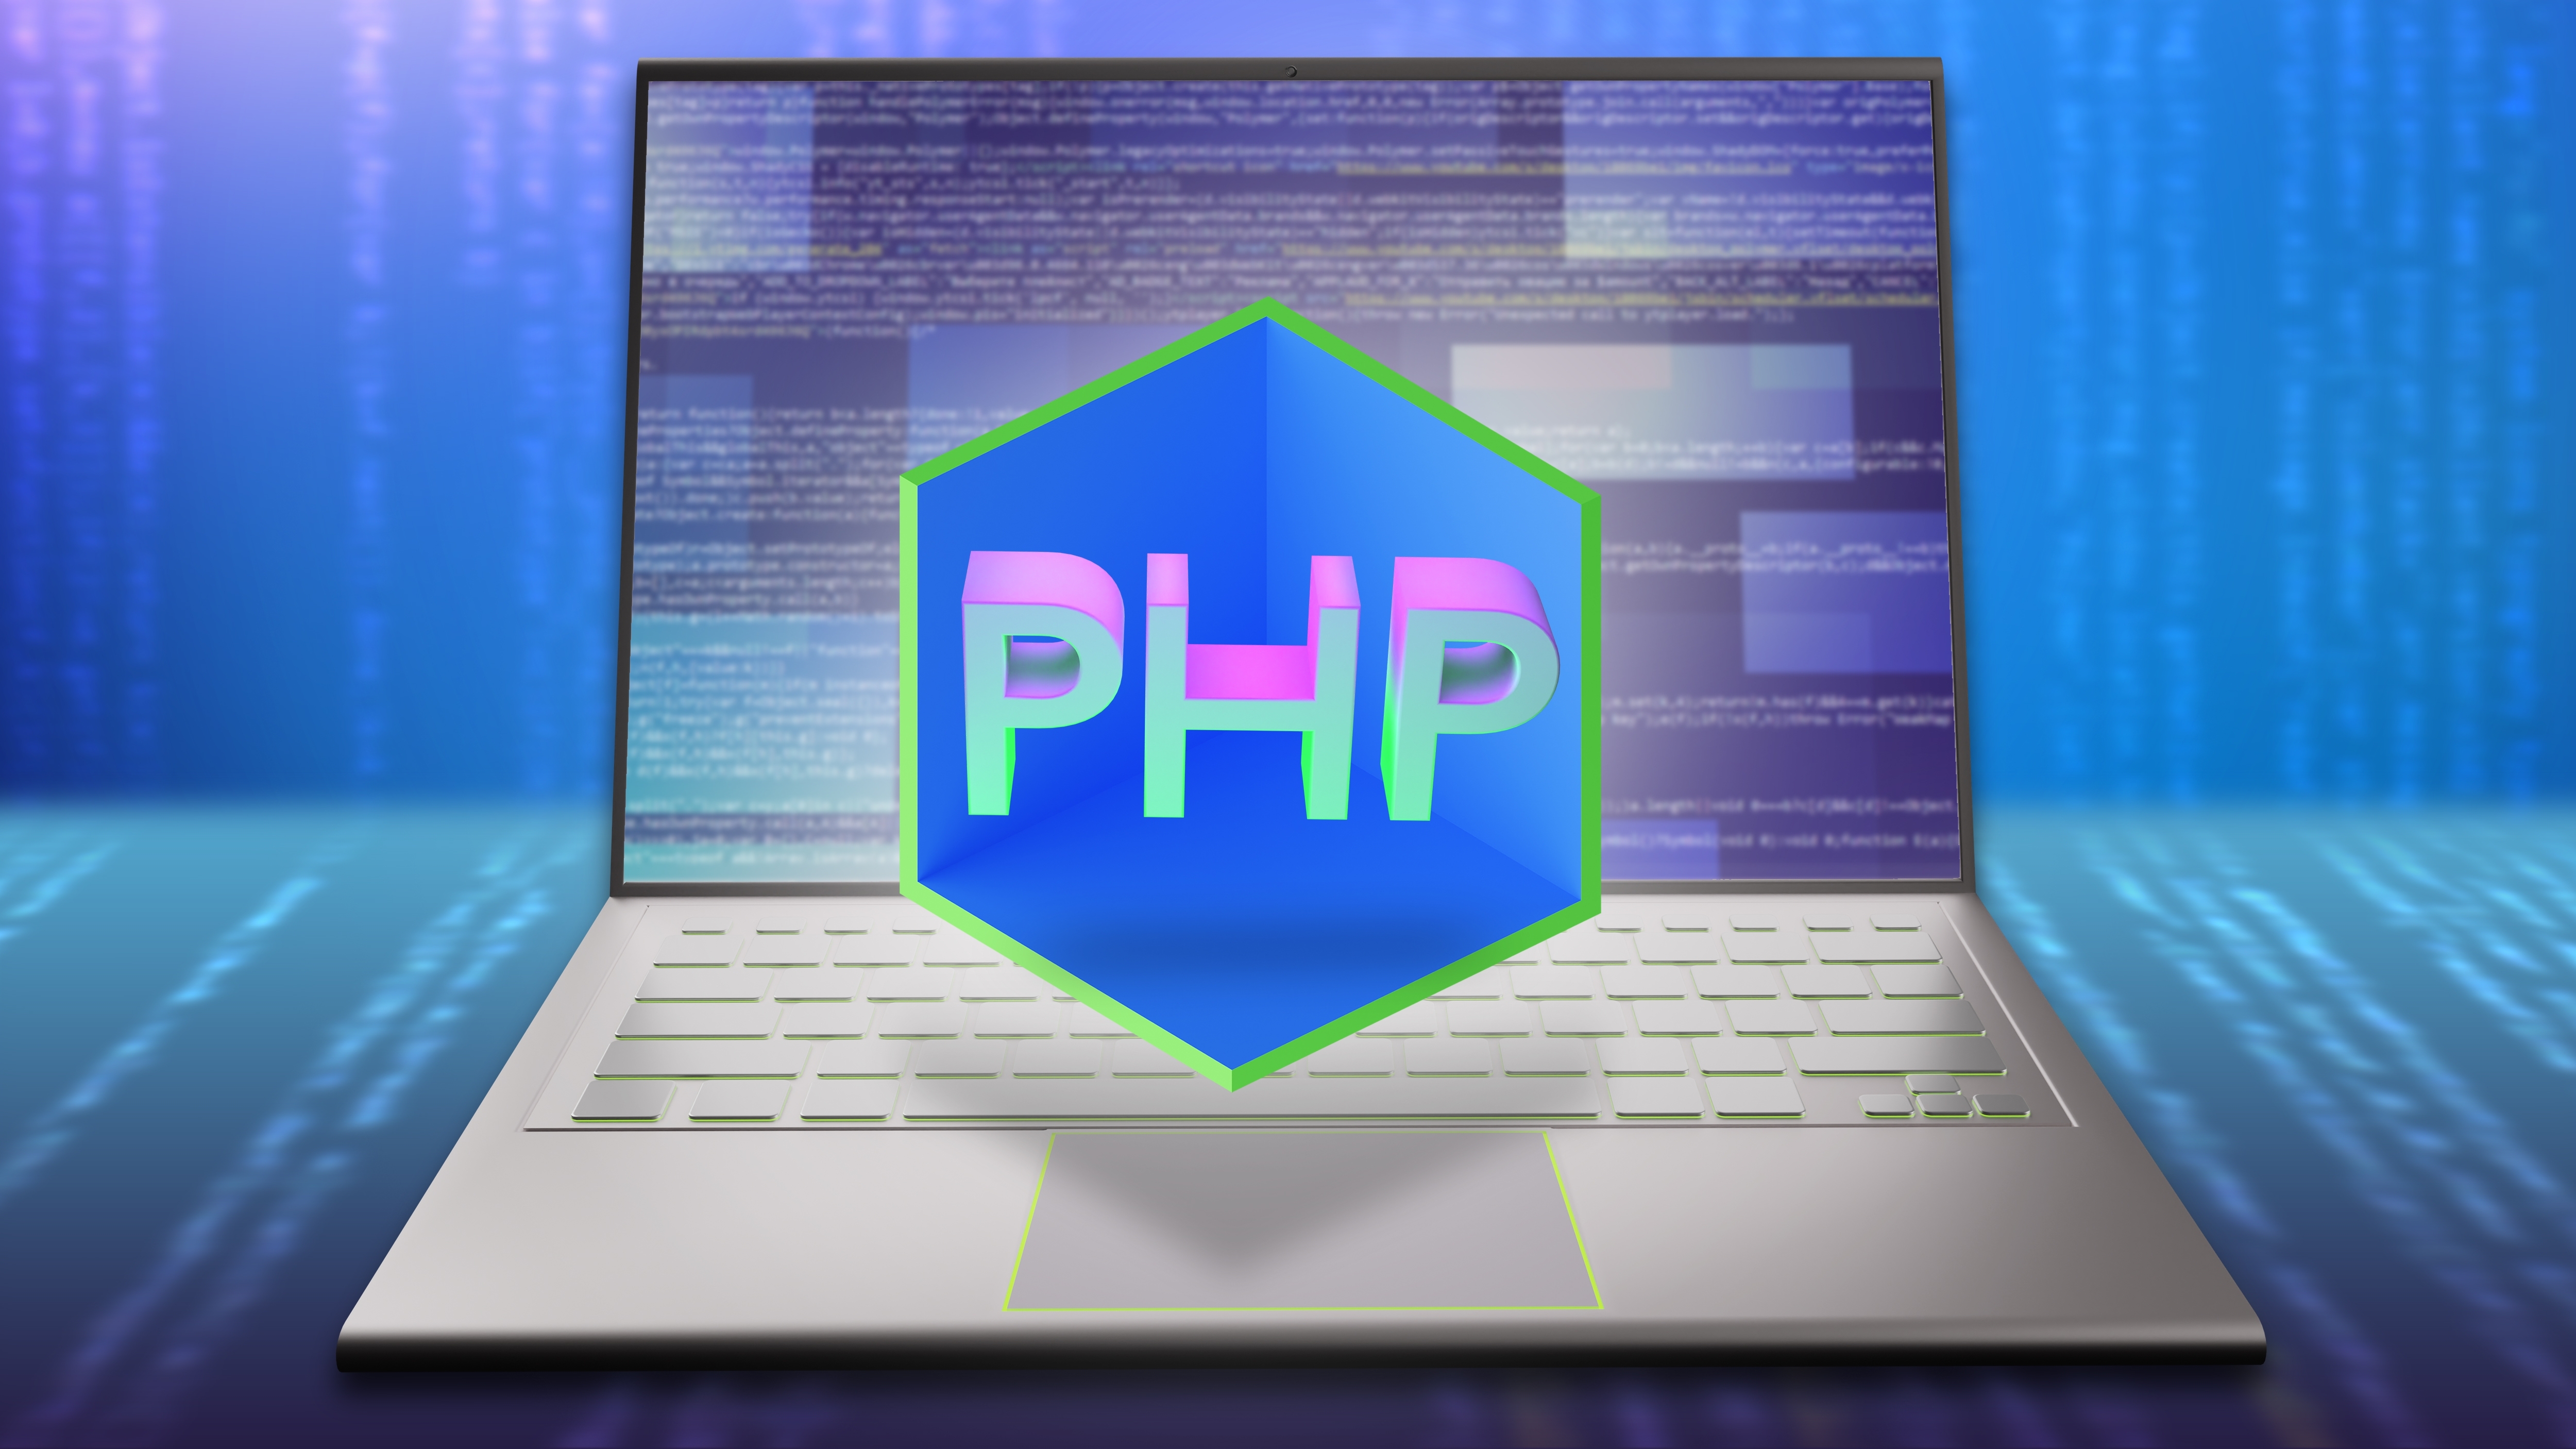 6 solutions to help recruiters of PHP programming engineers hunt talented candidates